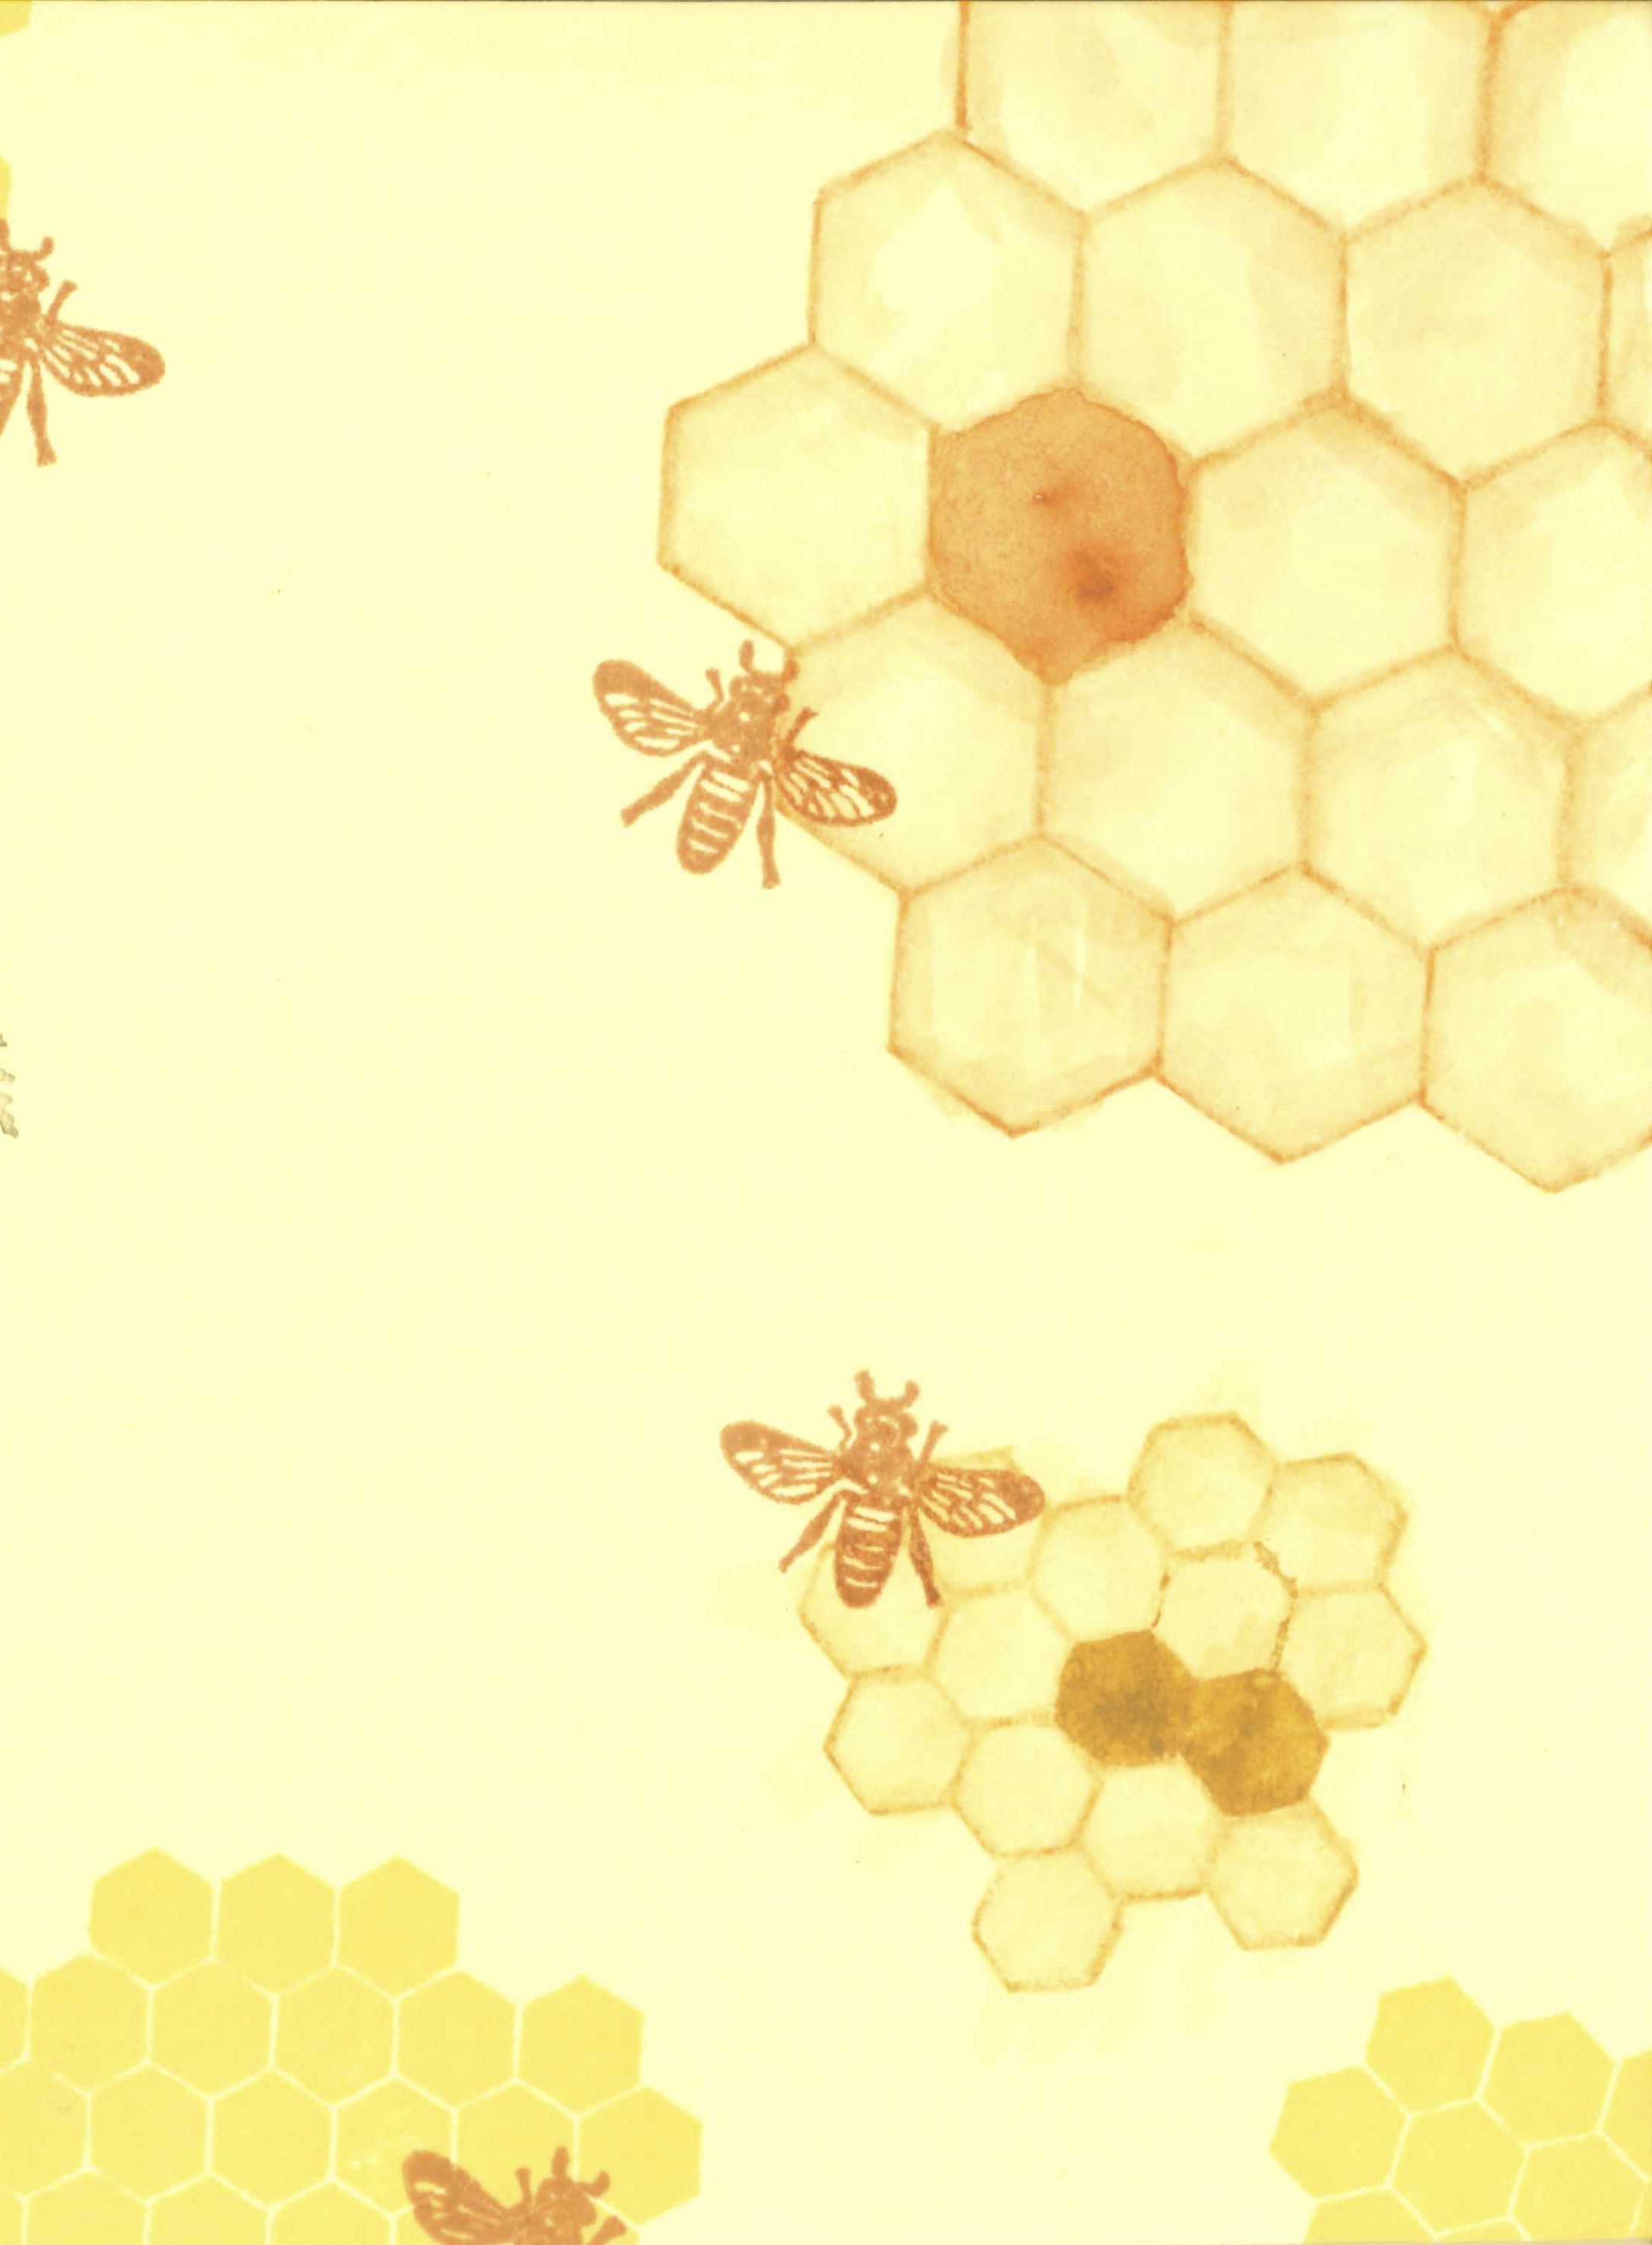 Posts about honeycomb on Curation. Painted hats, Honeycomb, Bee honeycomb